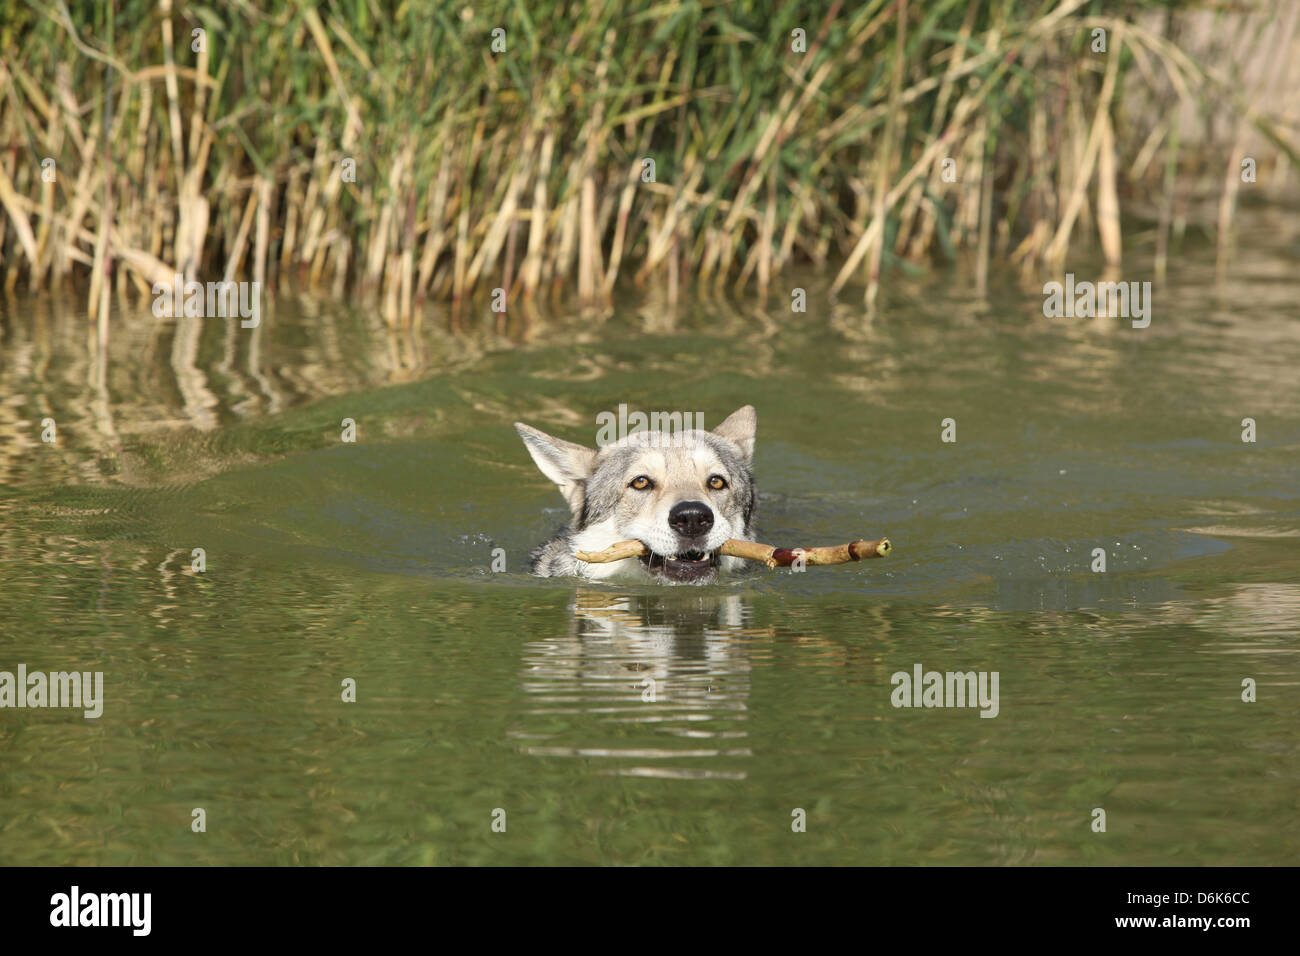 Swimming Saarloos Wolfhound with wooden stick with plenty of water grass behind Stock Photo